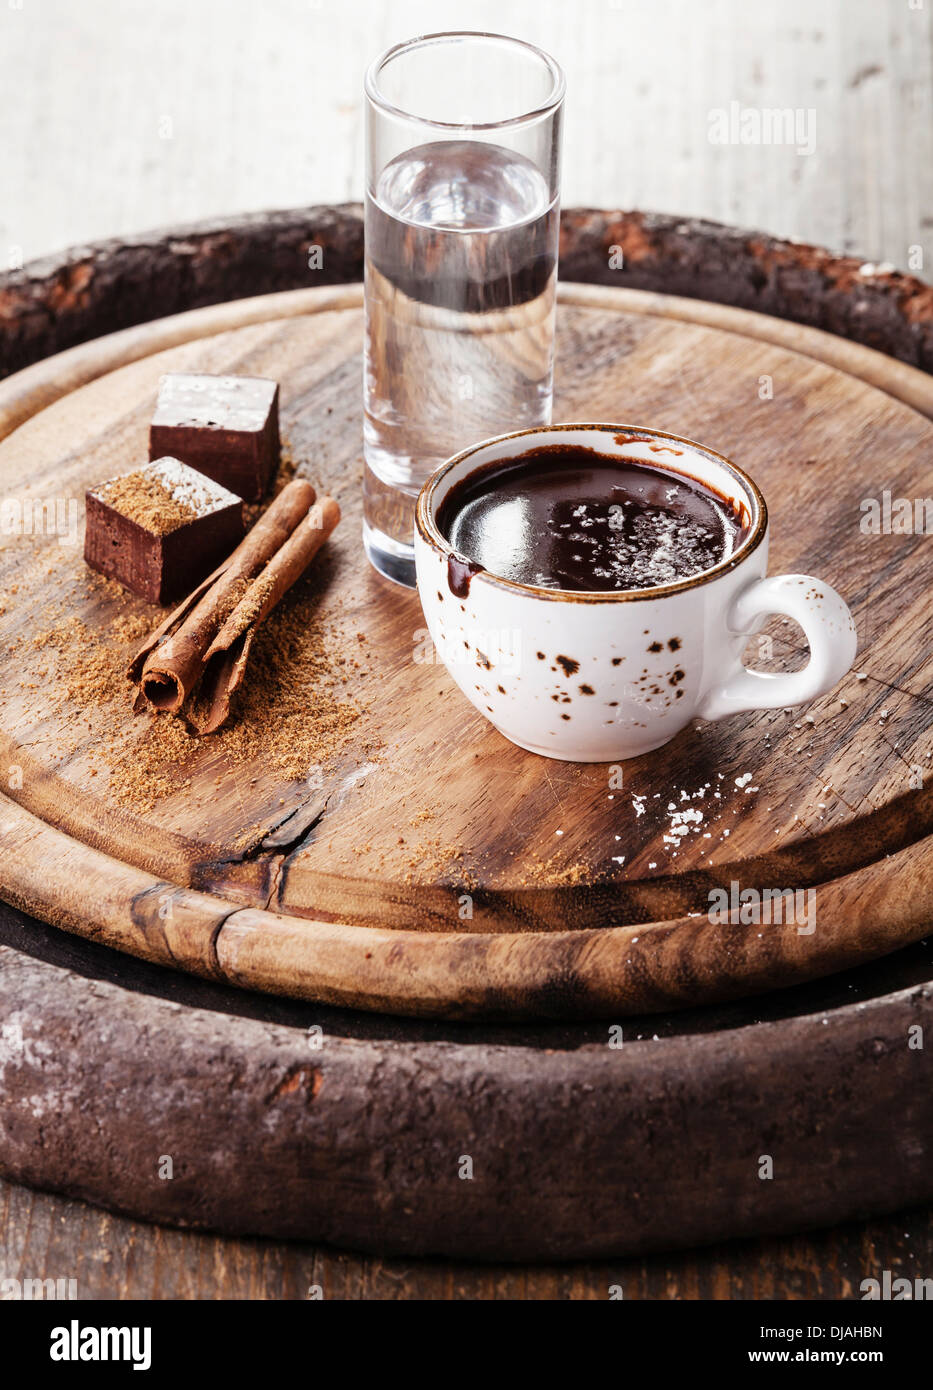 Hot chocolate with spices and water Stock Photo